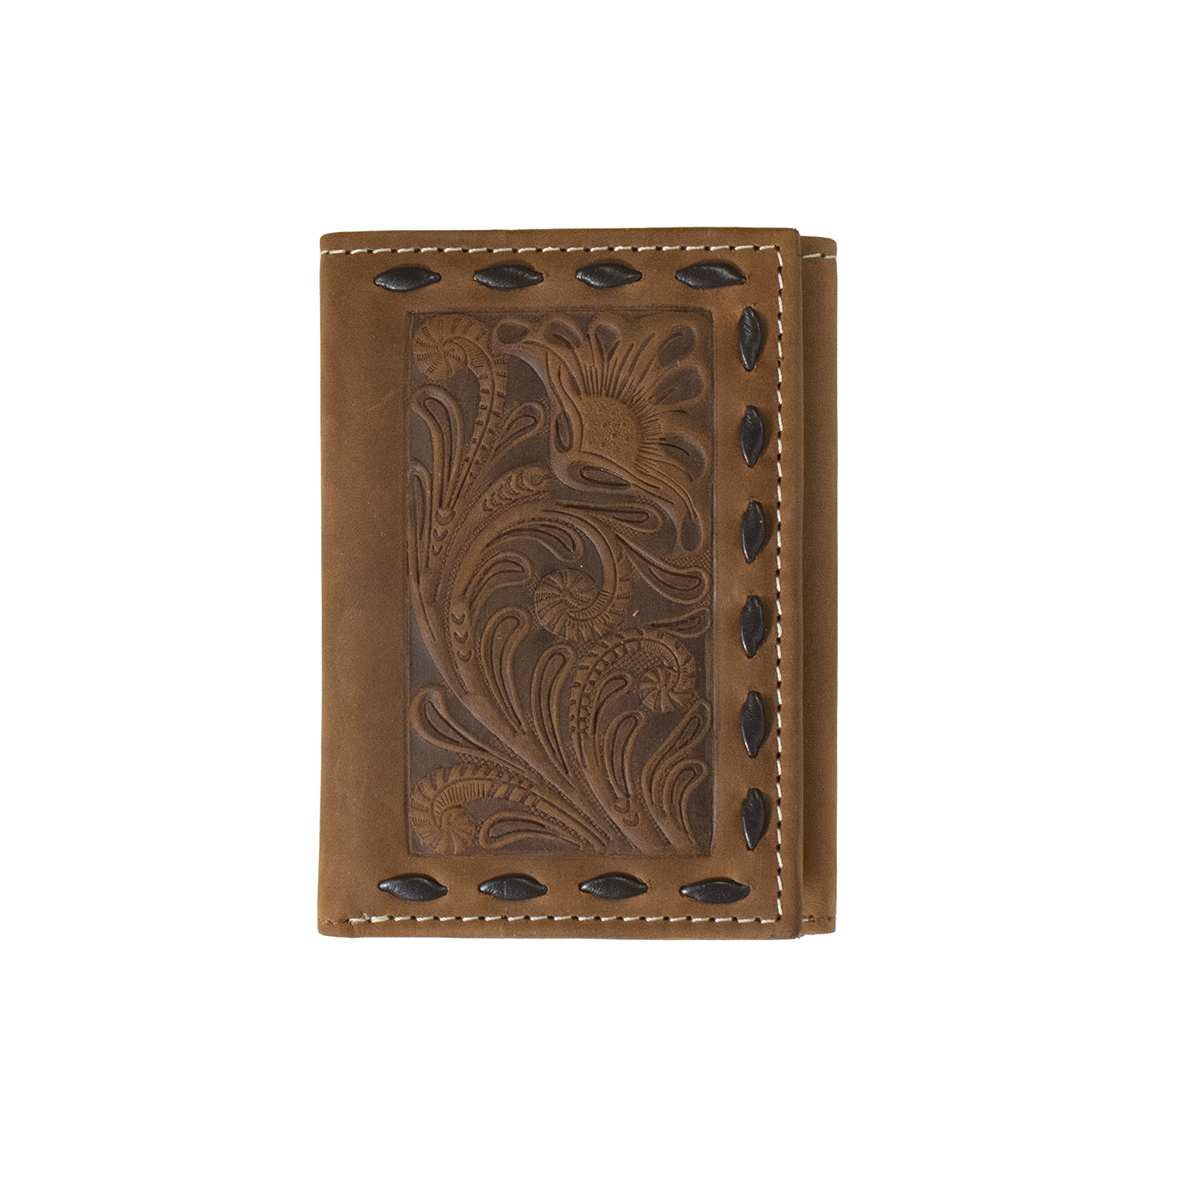 Nocona Trifold Floral Embossed Wallet - Chocolate/Brown